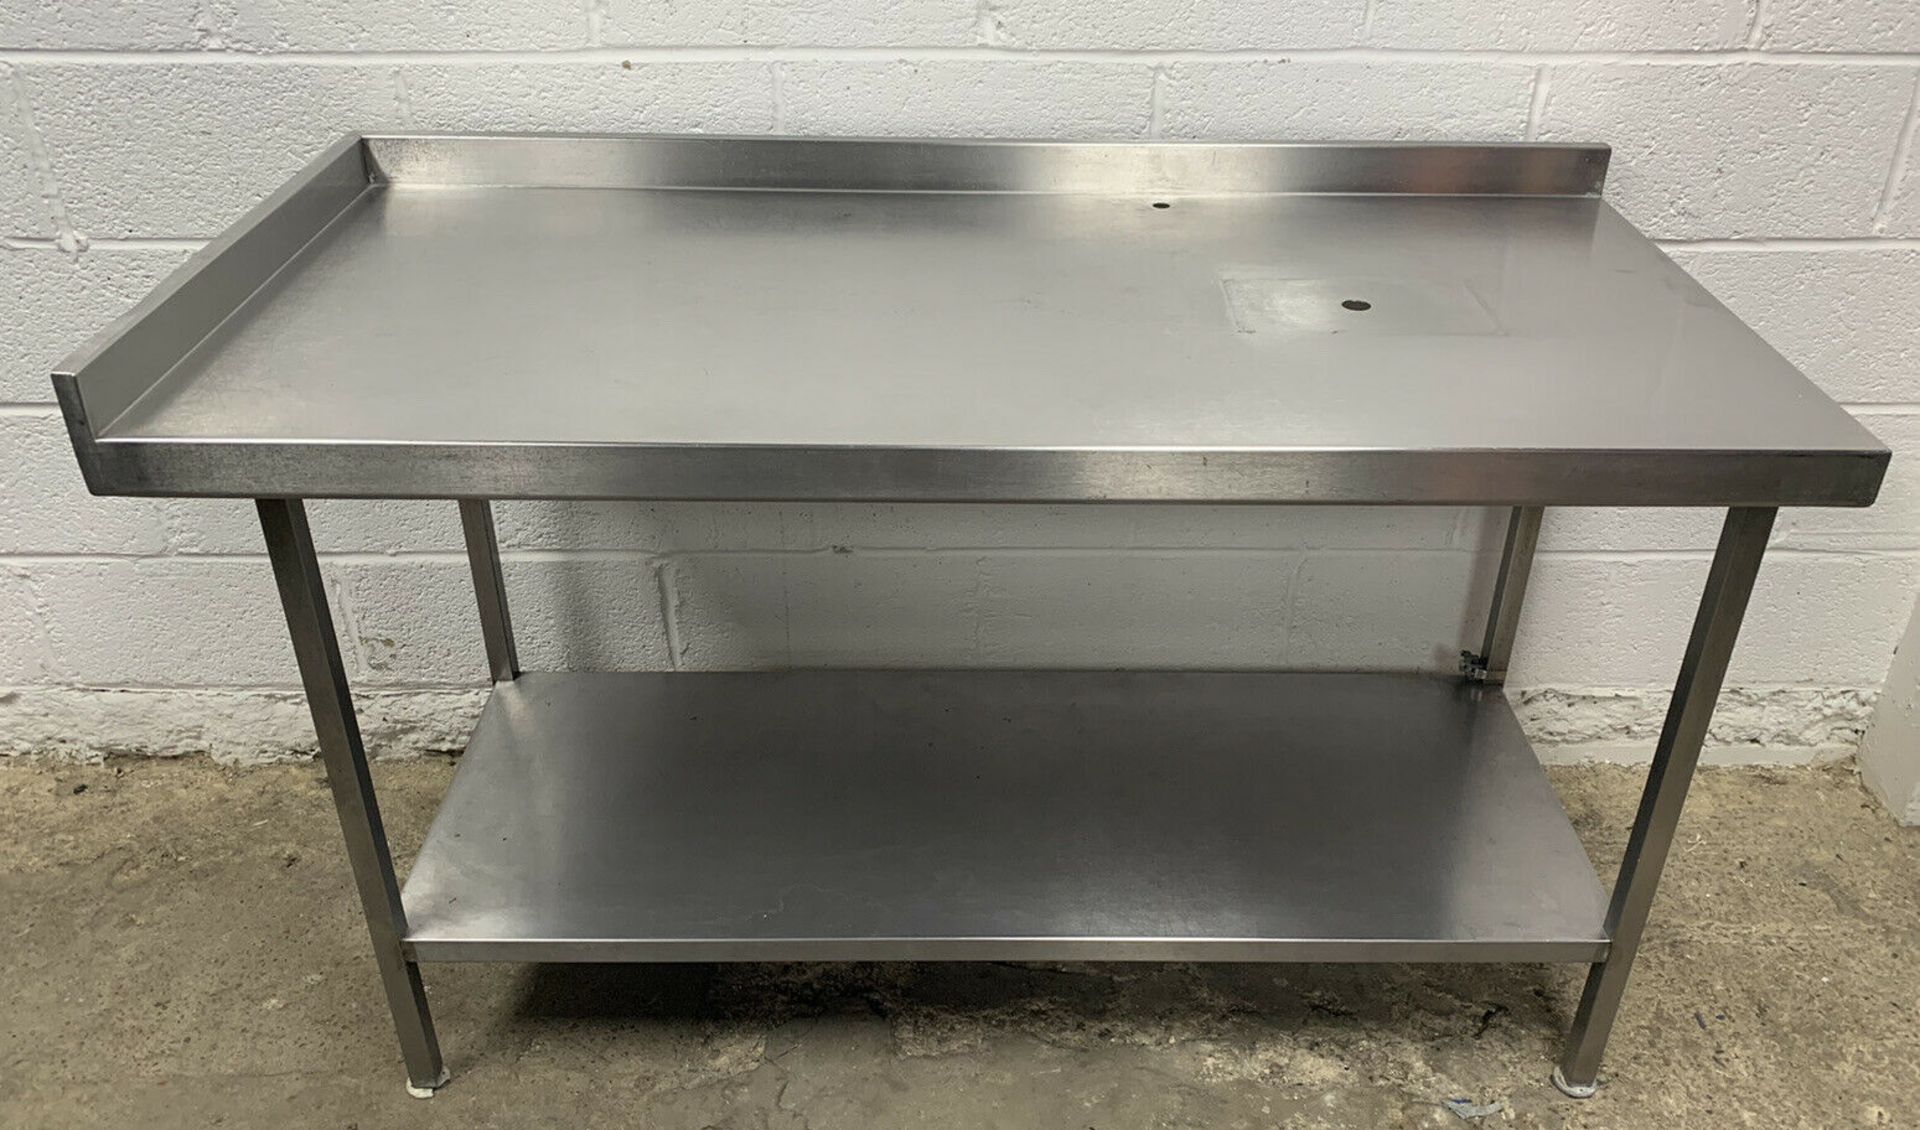 Stainless Steel Prep Table with Corner Upstand